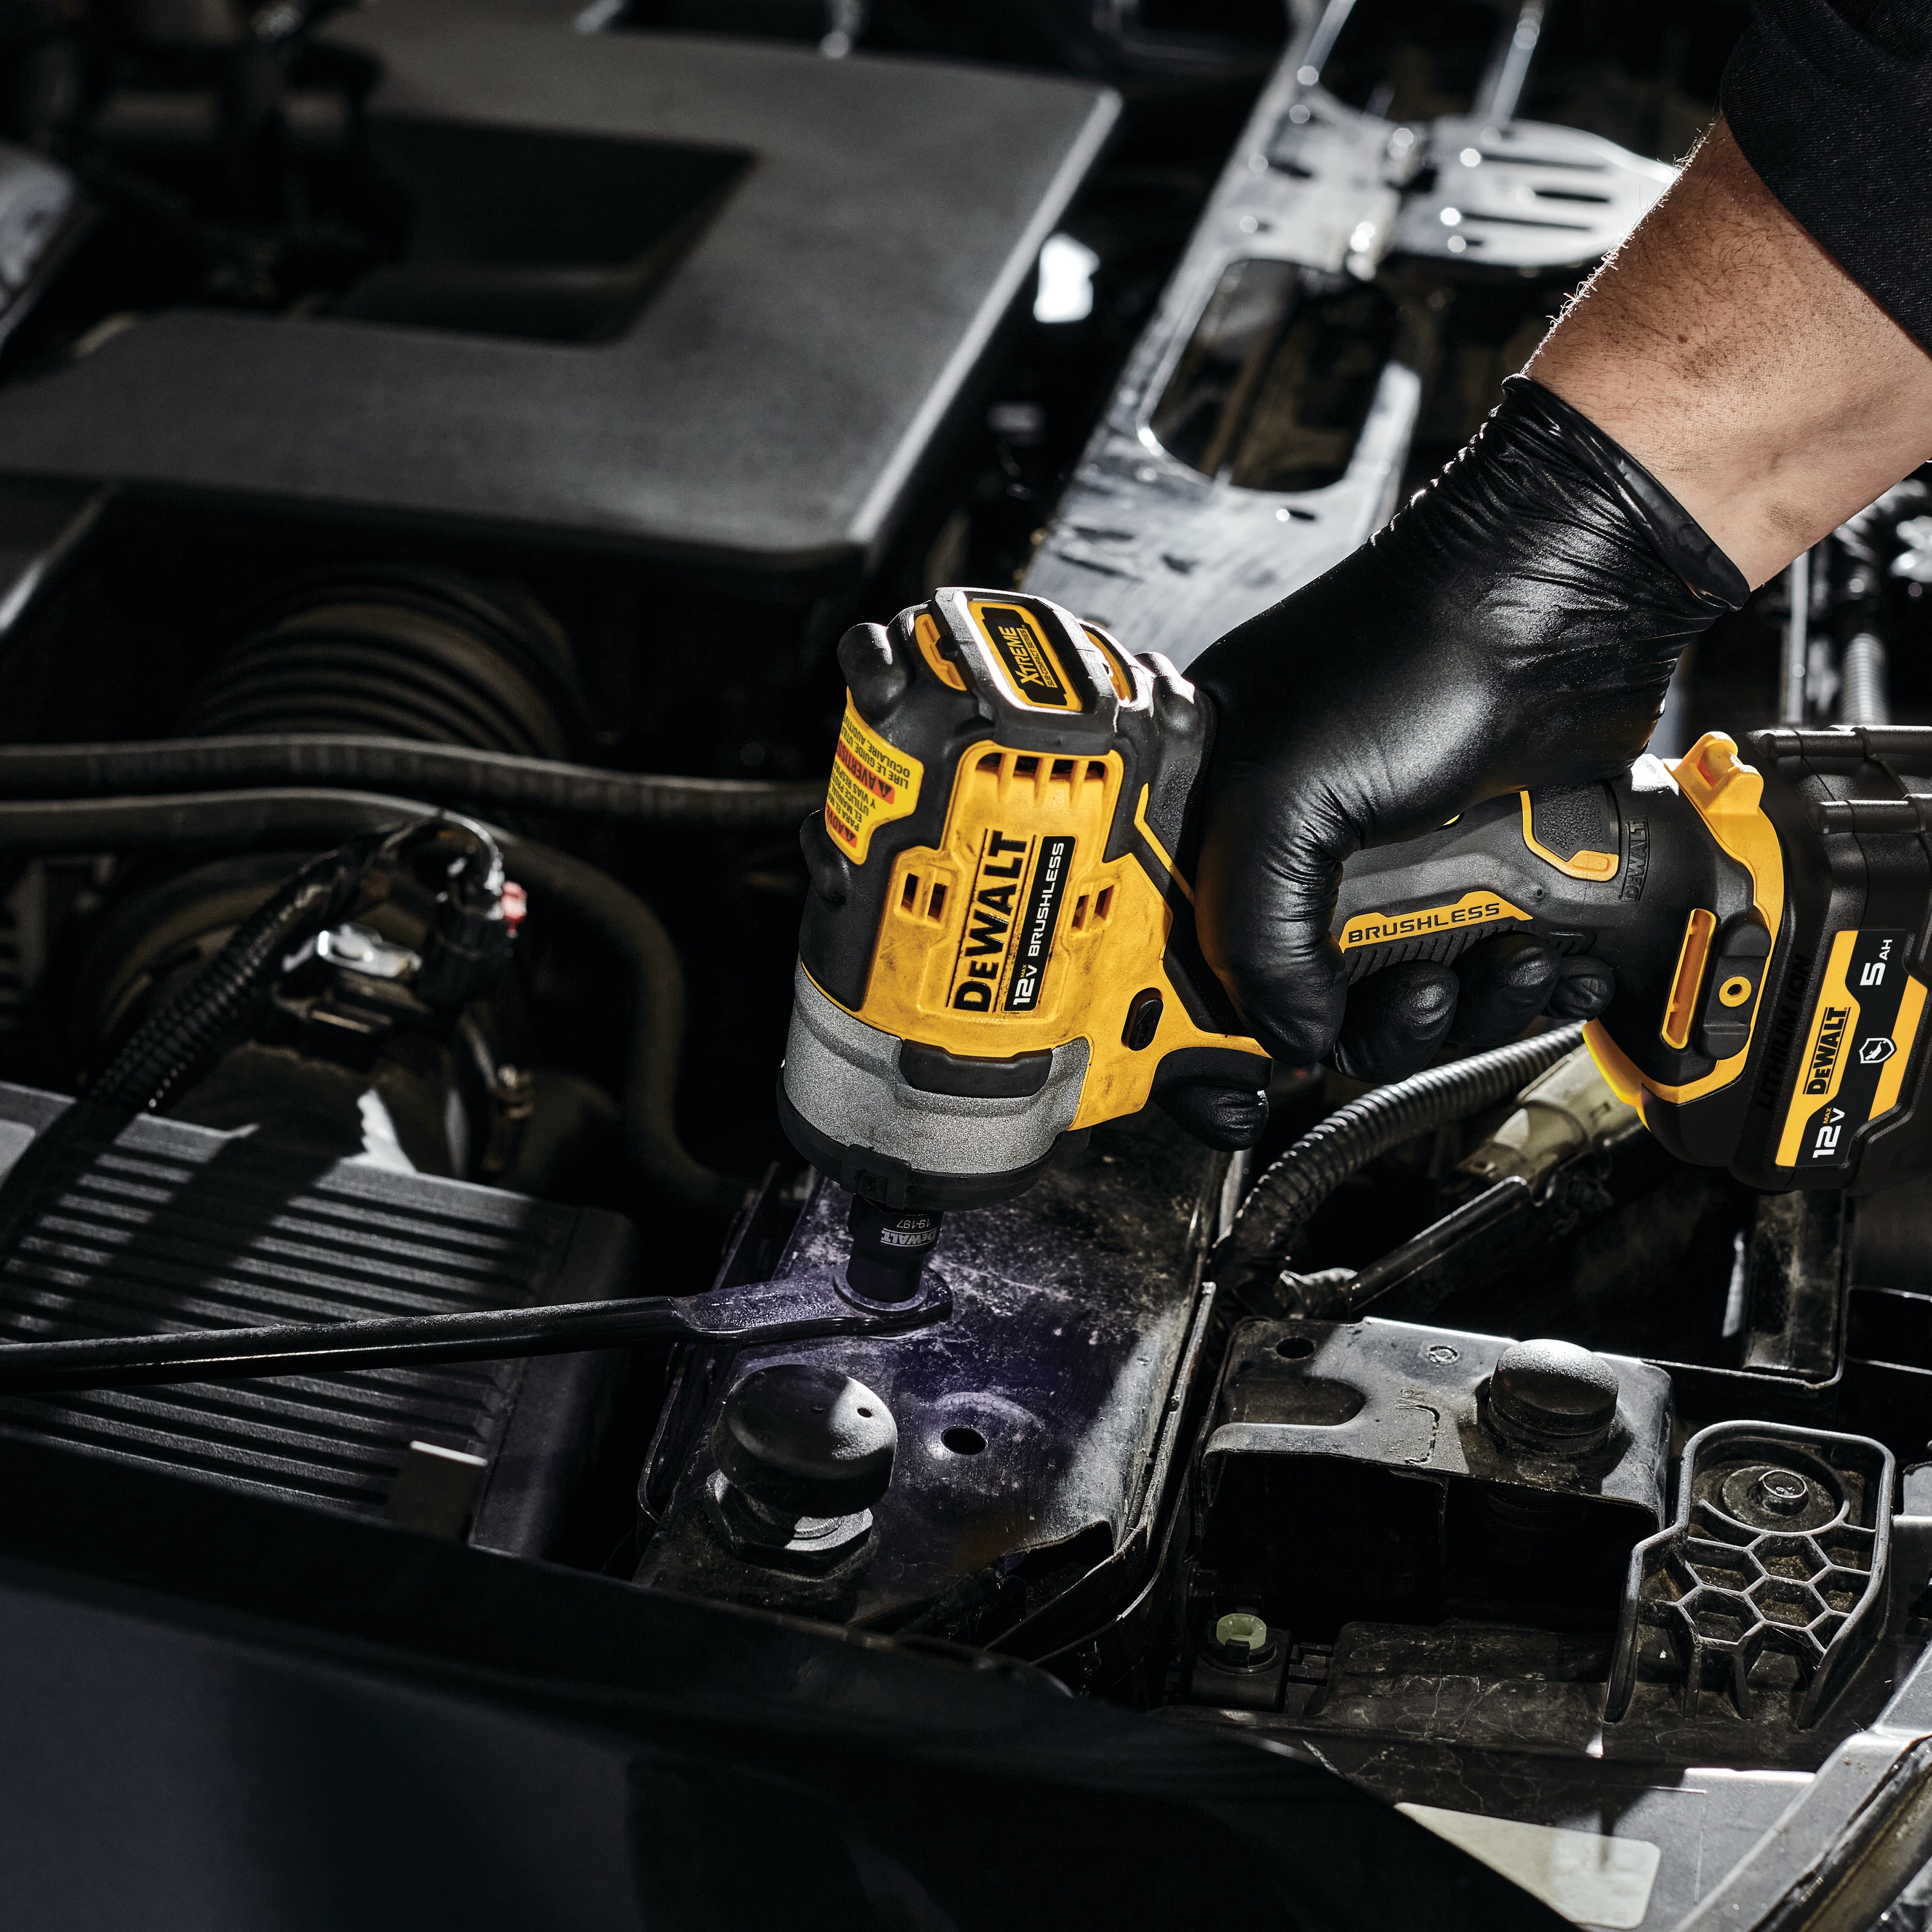 DEWALT - XTREME 12V MAX Brushless 38 in Cordless Impact Wrench Tool Only - DCF903B